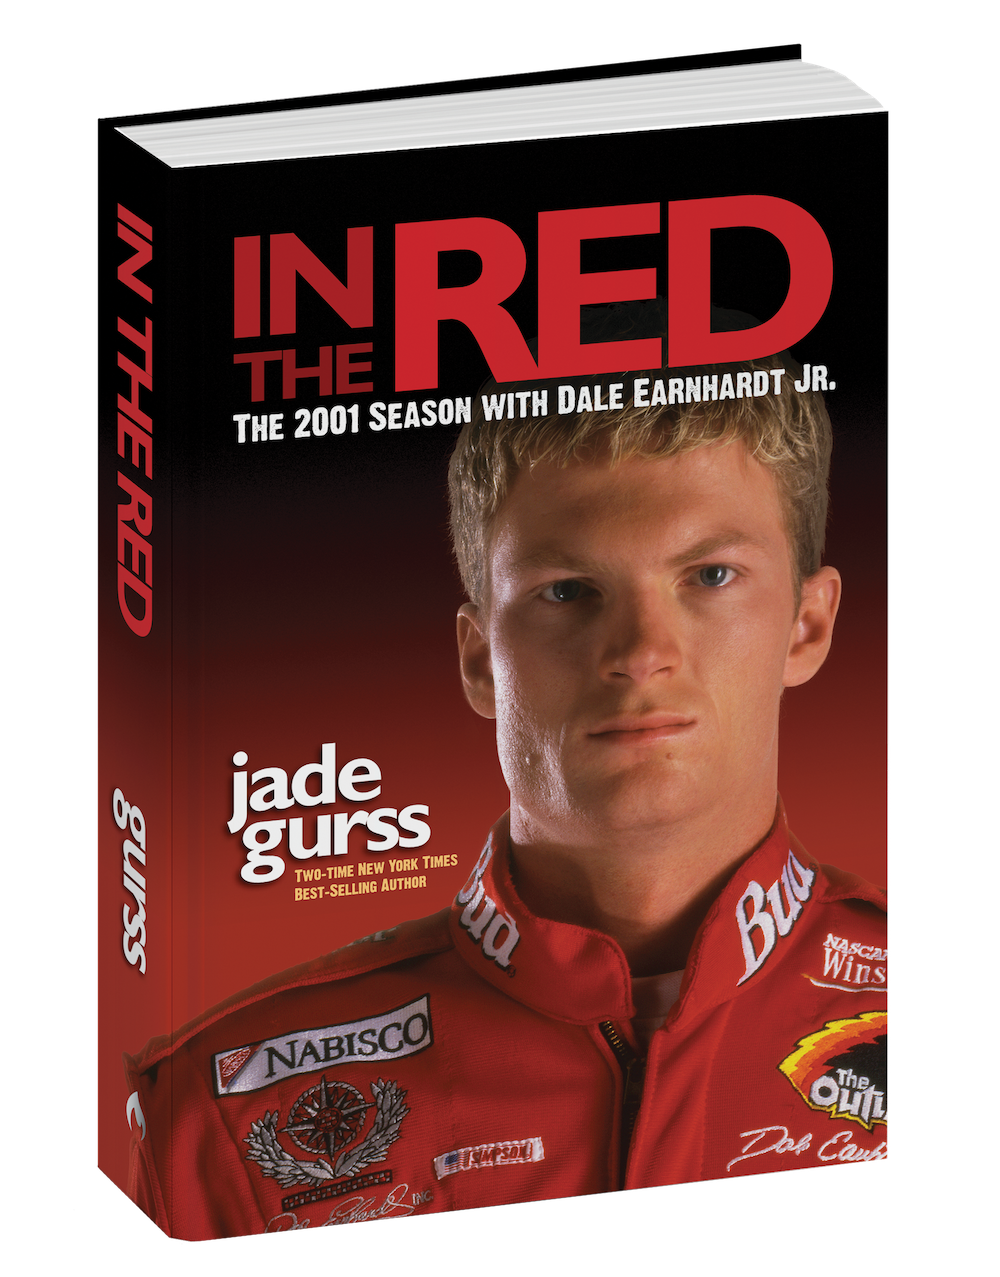 in the red by jade book cover